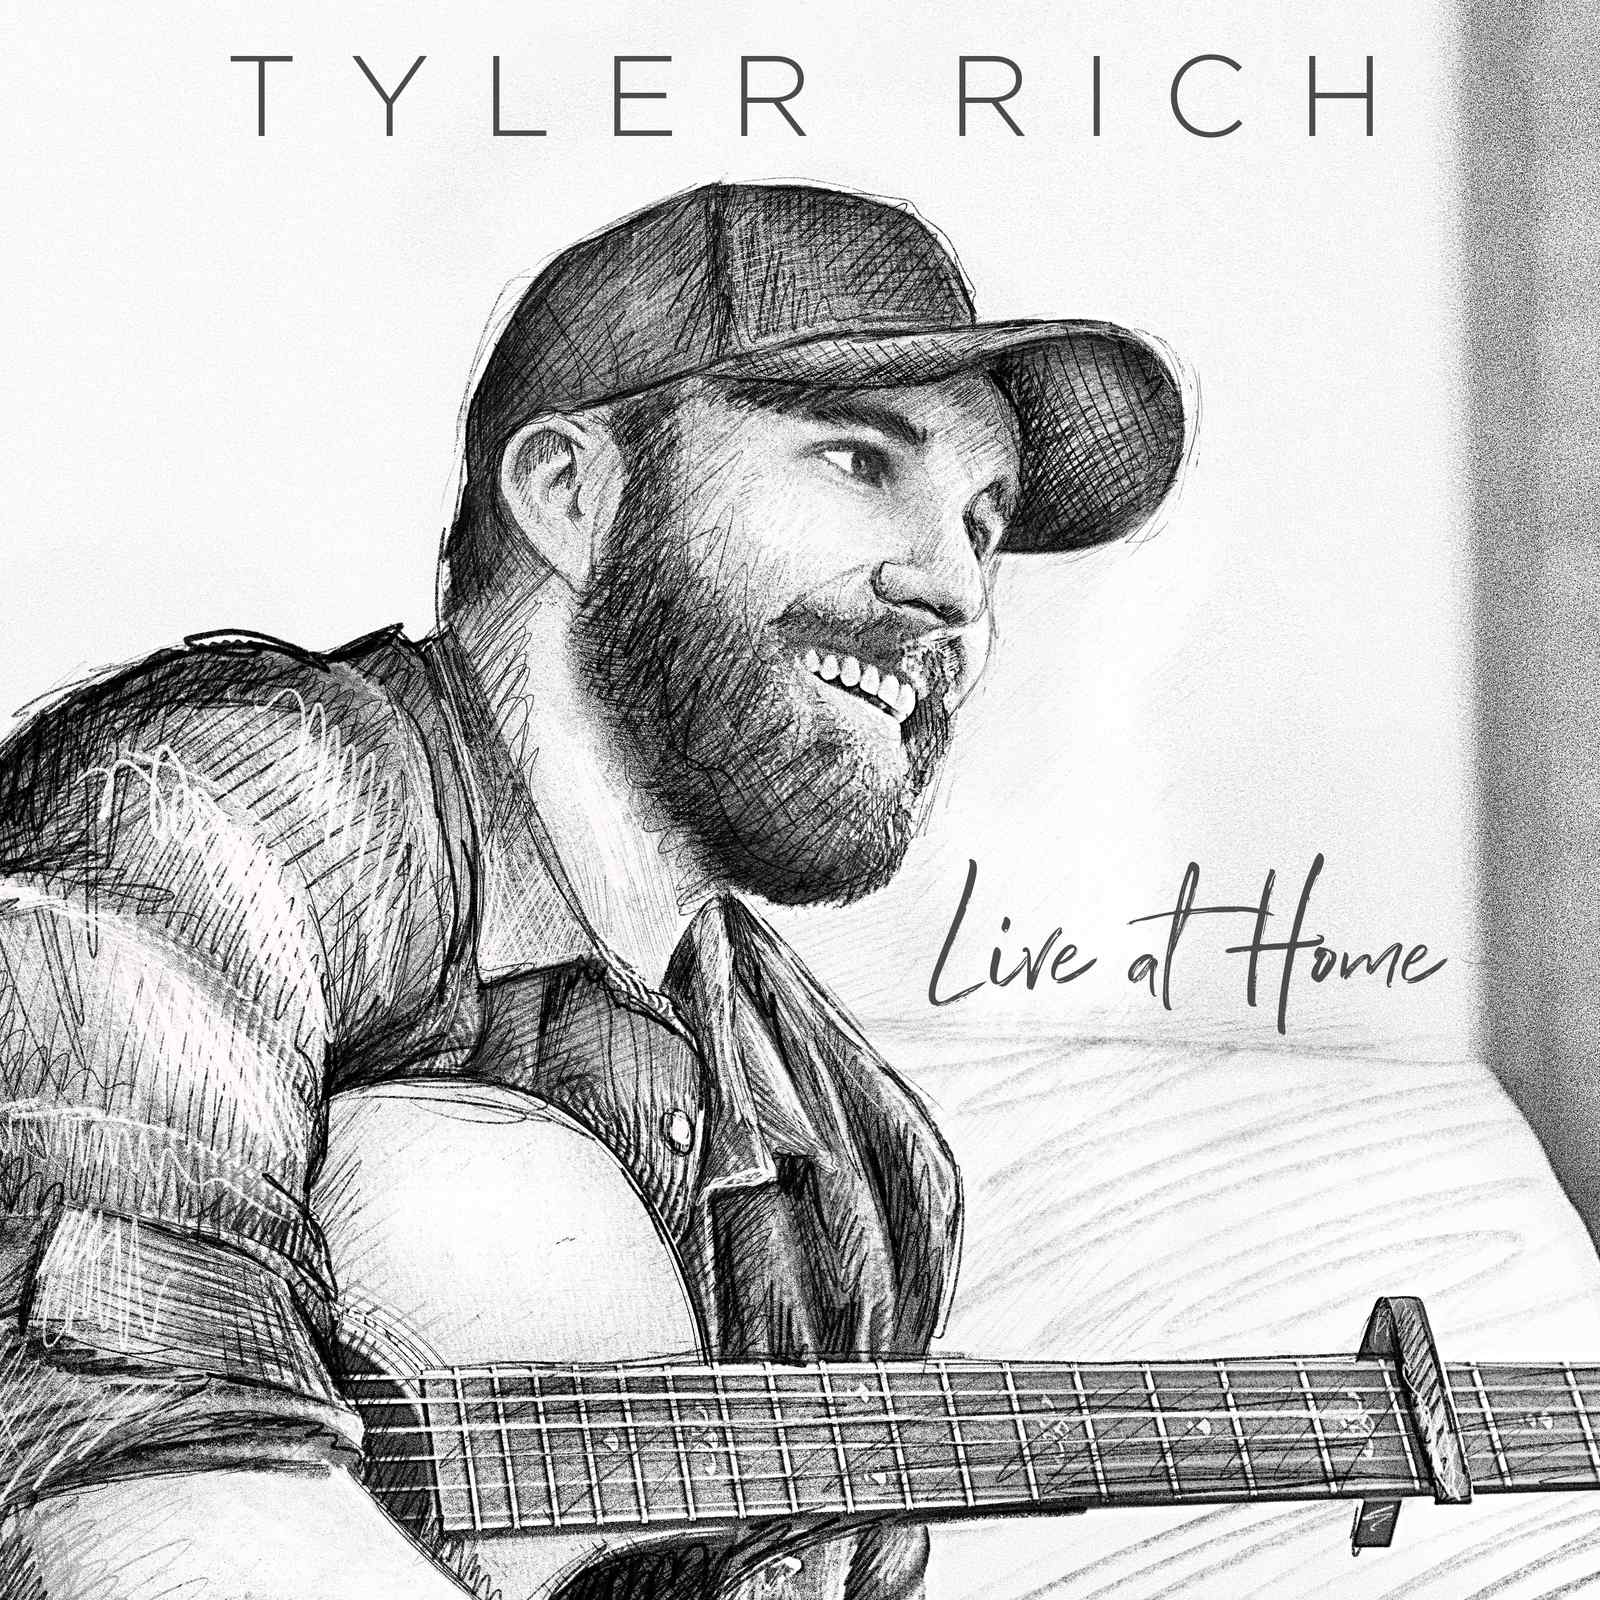 EP Release: Live At Home by Tyler Rich